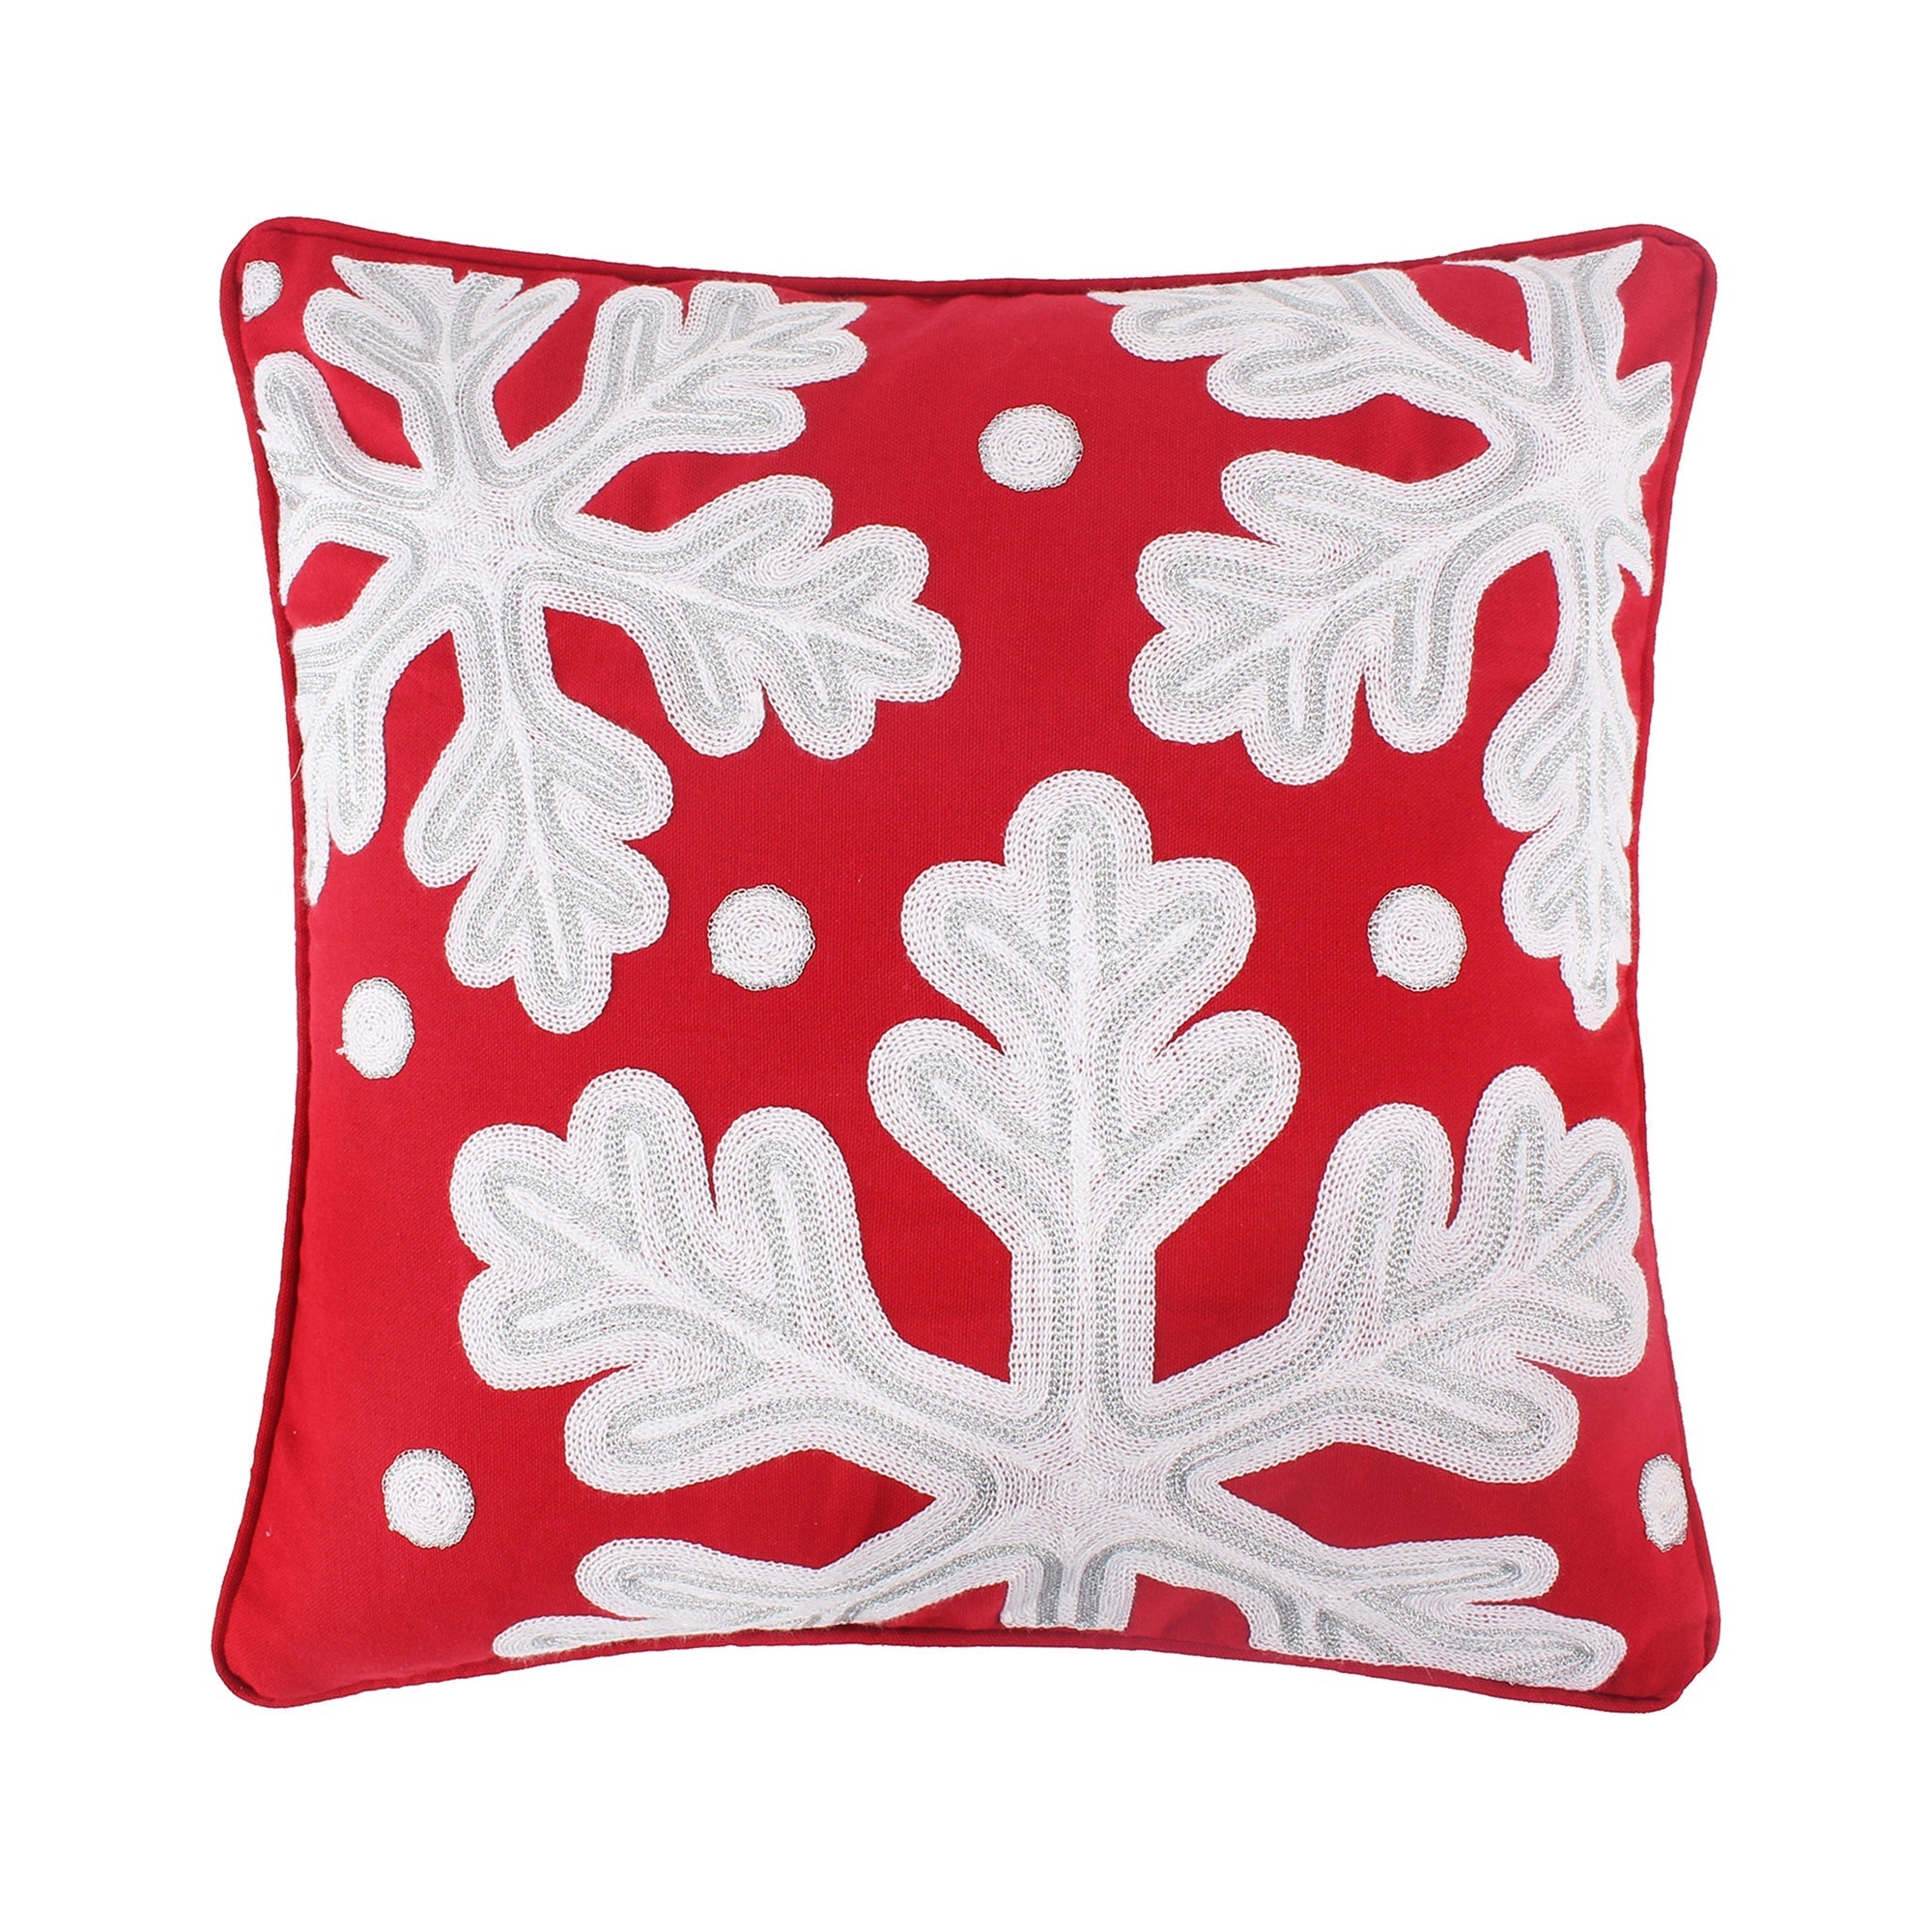 All is Bright Snowflake Pillow 18X18